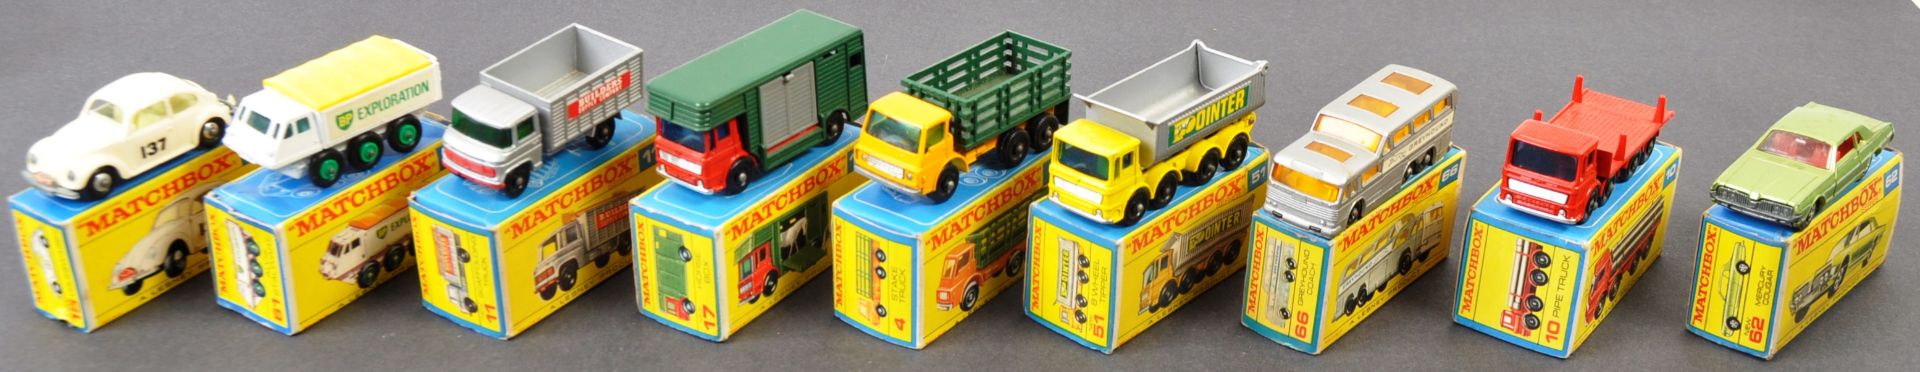 COLLECTION OF MATCHBOX LESNEY SUPERFAST DIECAST MODELS